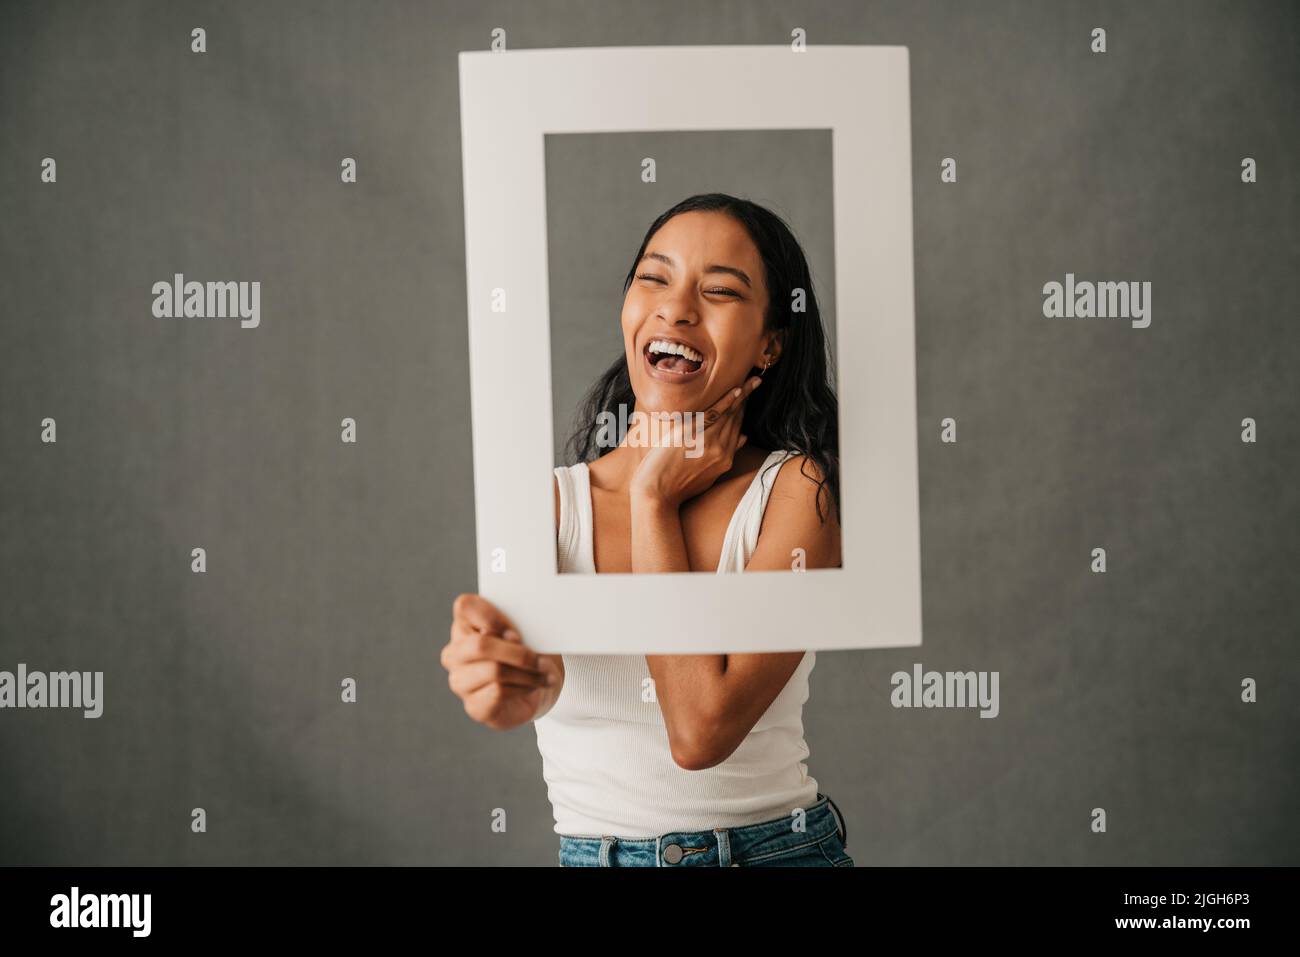 Laughing smiling close up of multiethnic female holding a frame  Stock Photo